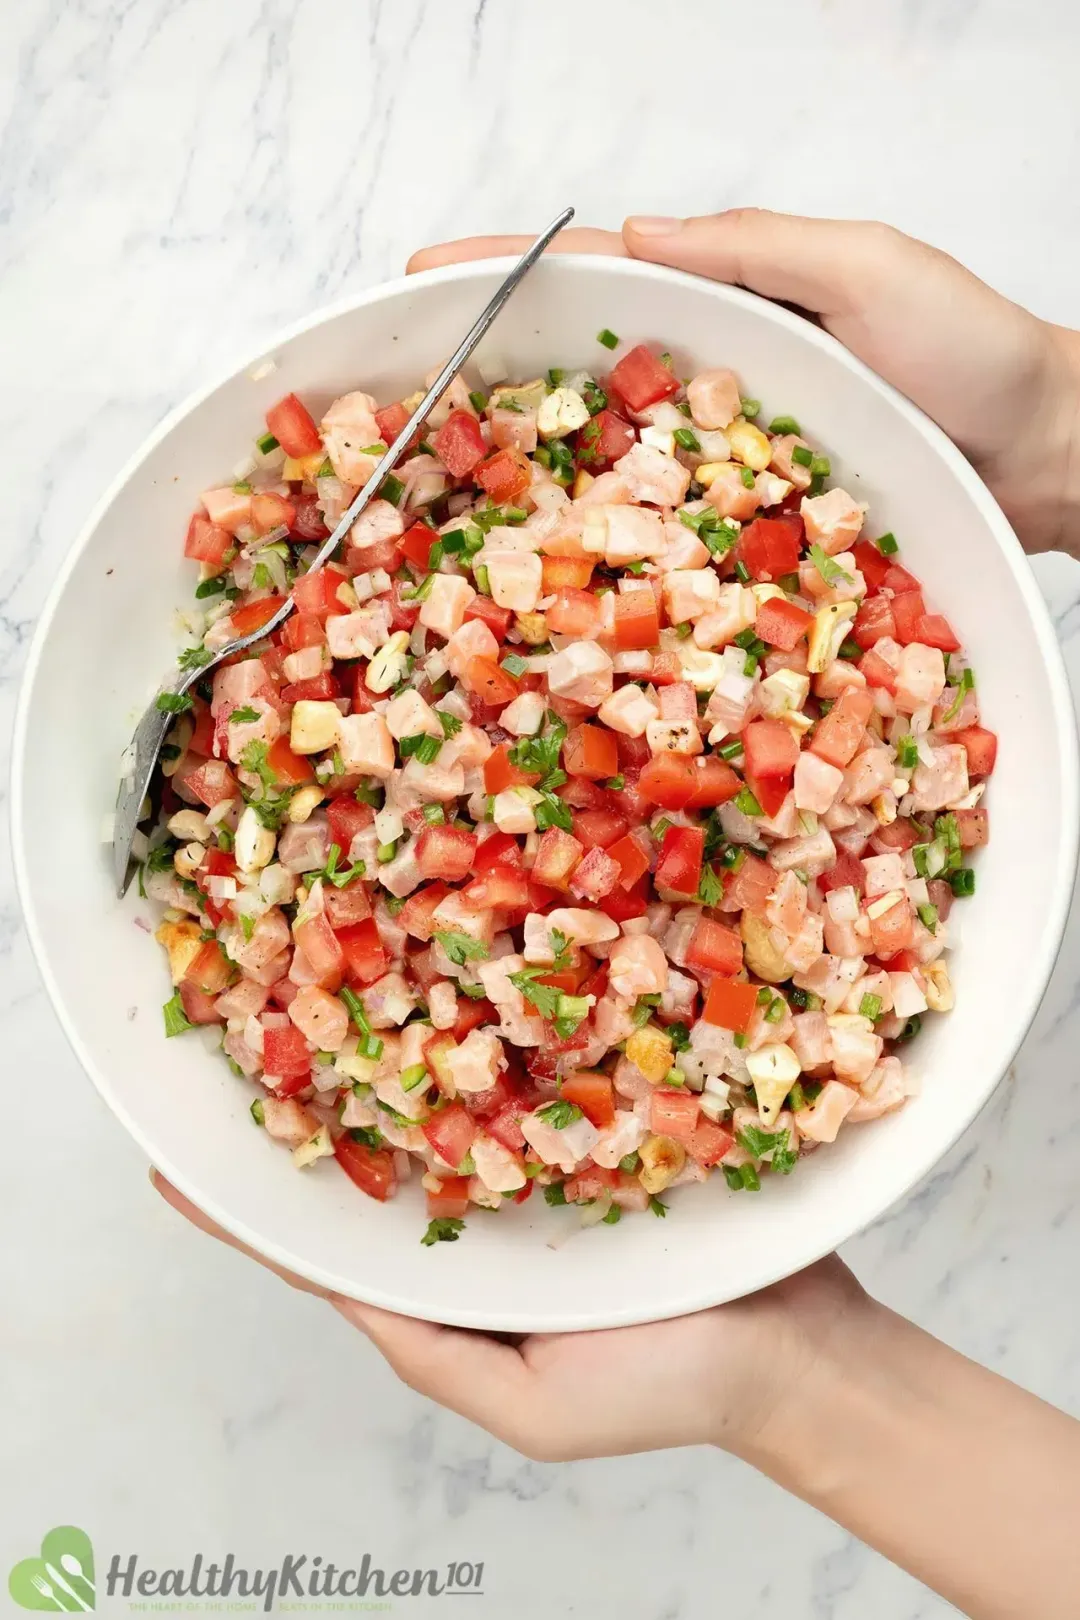 Two hands holding a large plate of Lomi Lomi salmon salad with salmon cubes, chopped tomatoes, and chopped herbs